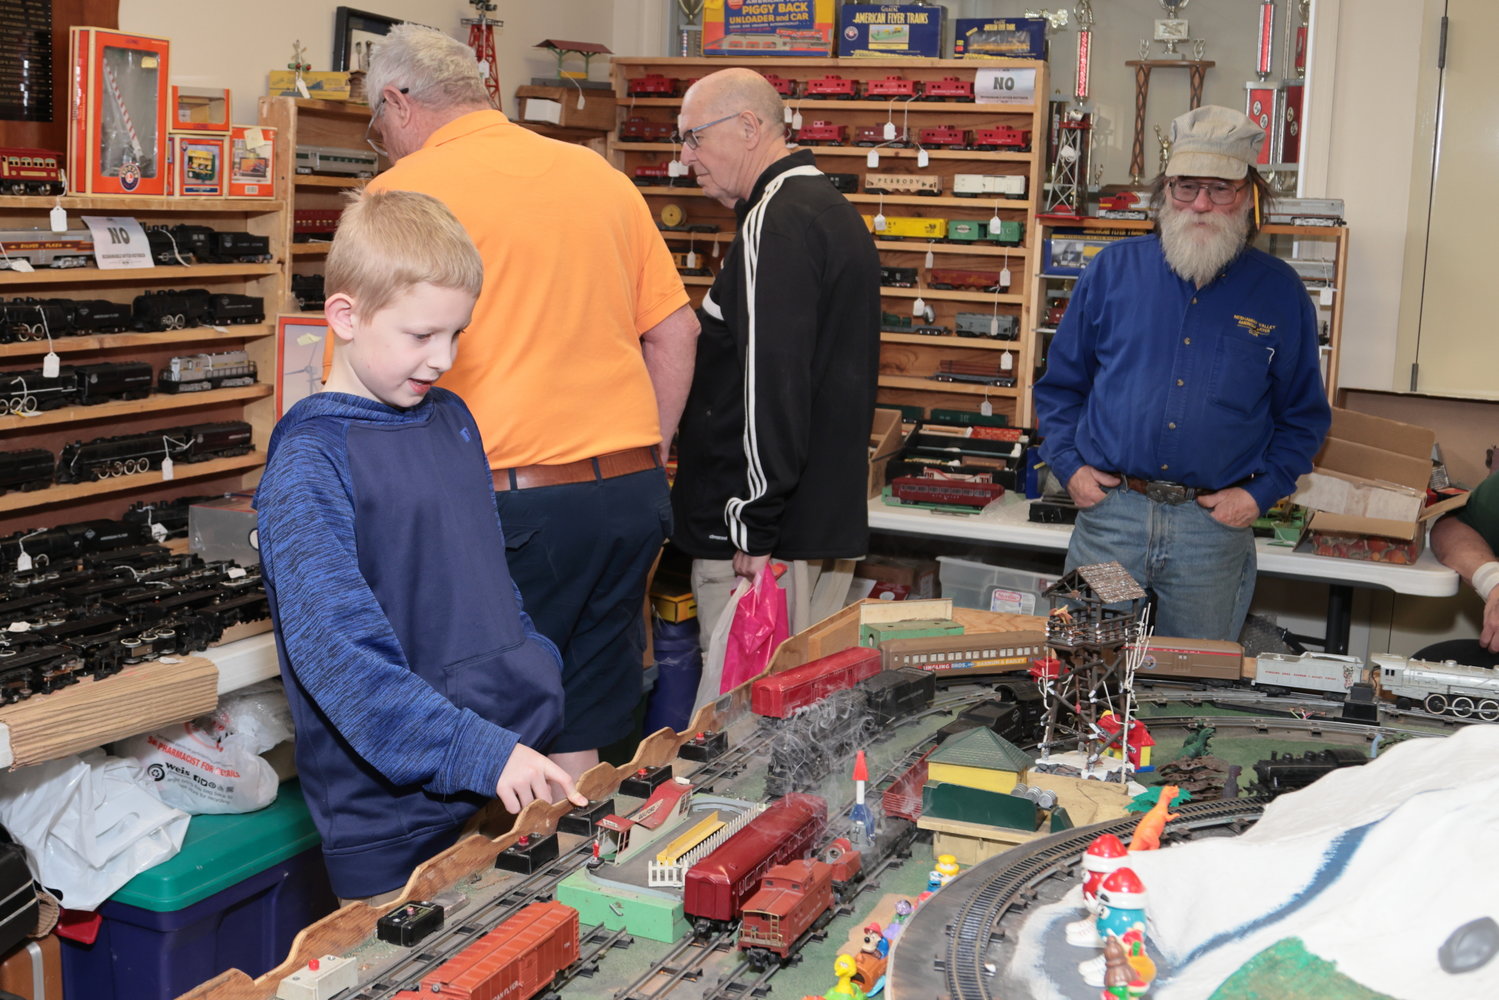 Pamela Pearl brought her son Maxwell to the Model Train Show and Sale from Greeley, PA. A first-time visitor, Maxwell was having fun pressing buttons to control different elements on the train layout.  The man on the right in the blue shirt is Tom Keegan, one of the owners of the trains and layout.